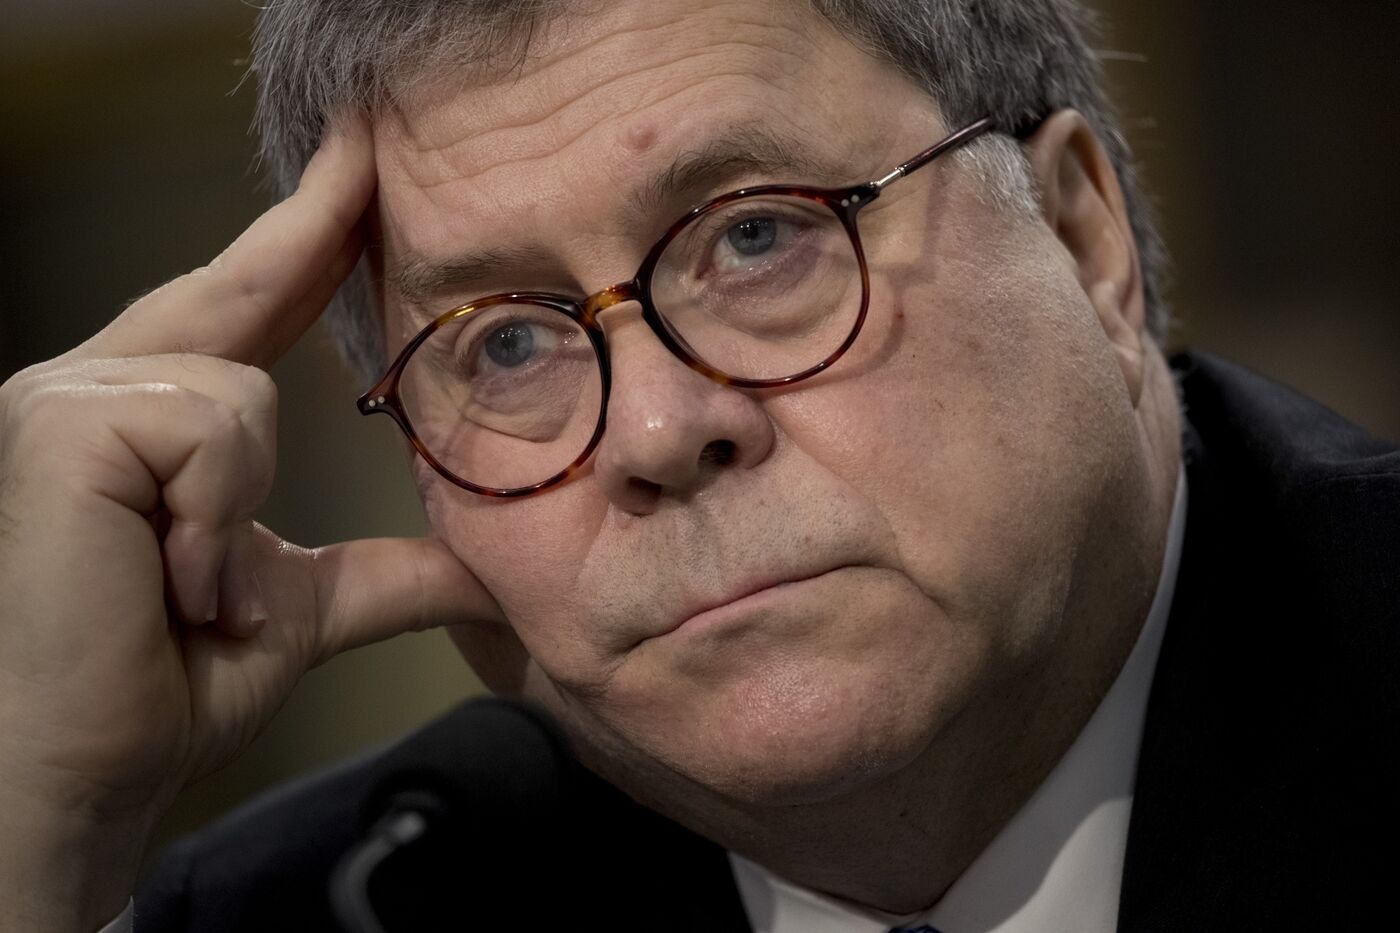 Spying Did Occur, but Barr Should Also Focus On the Leaking - Bloomberg